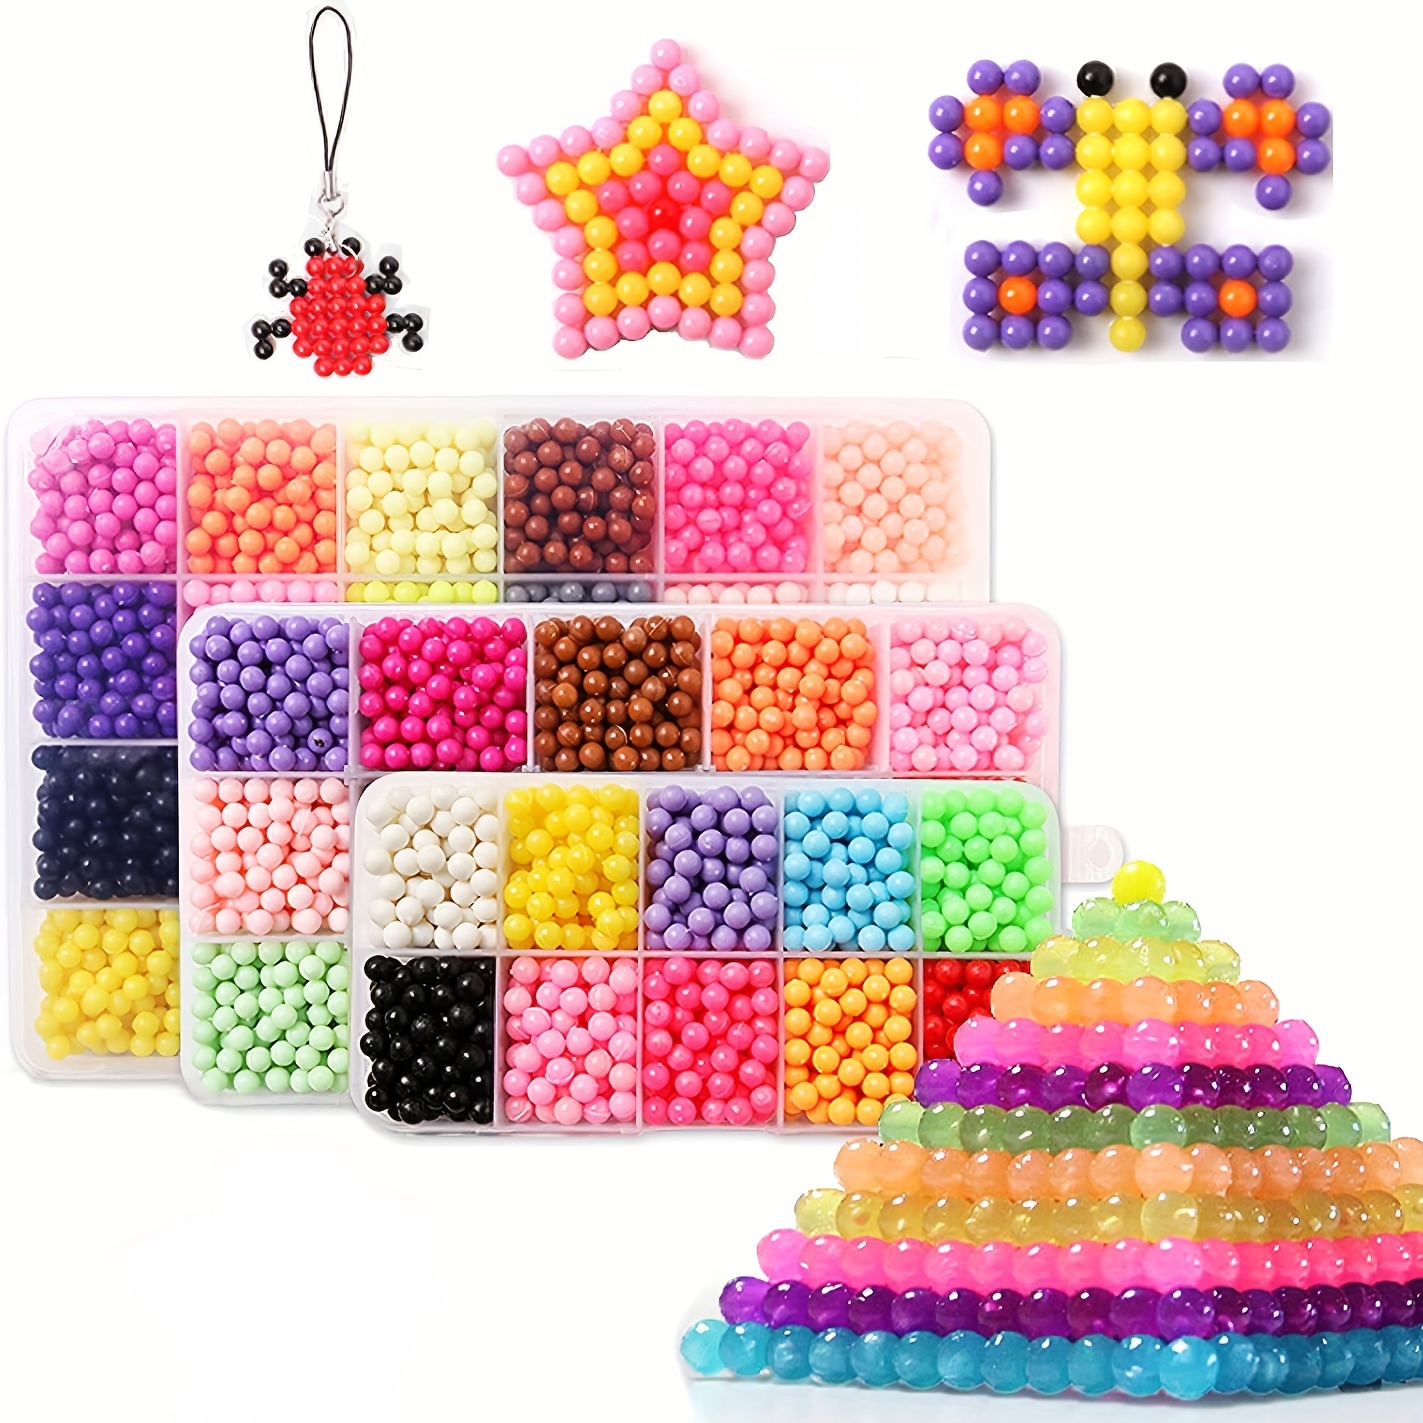 Water Fuse Beads, Water Fuse Beads Kit-2400 beads 15 colors，Magic Water  Spray Beads with Pegboard Full Set Art Crafts Toys, Gift of Kids Beginners